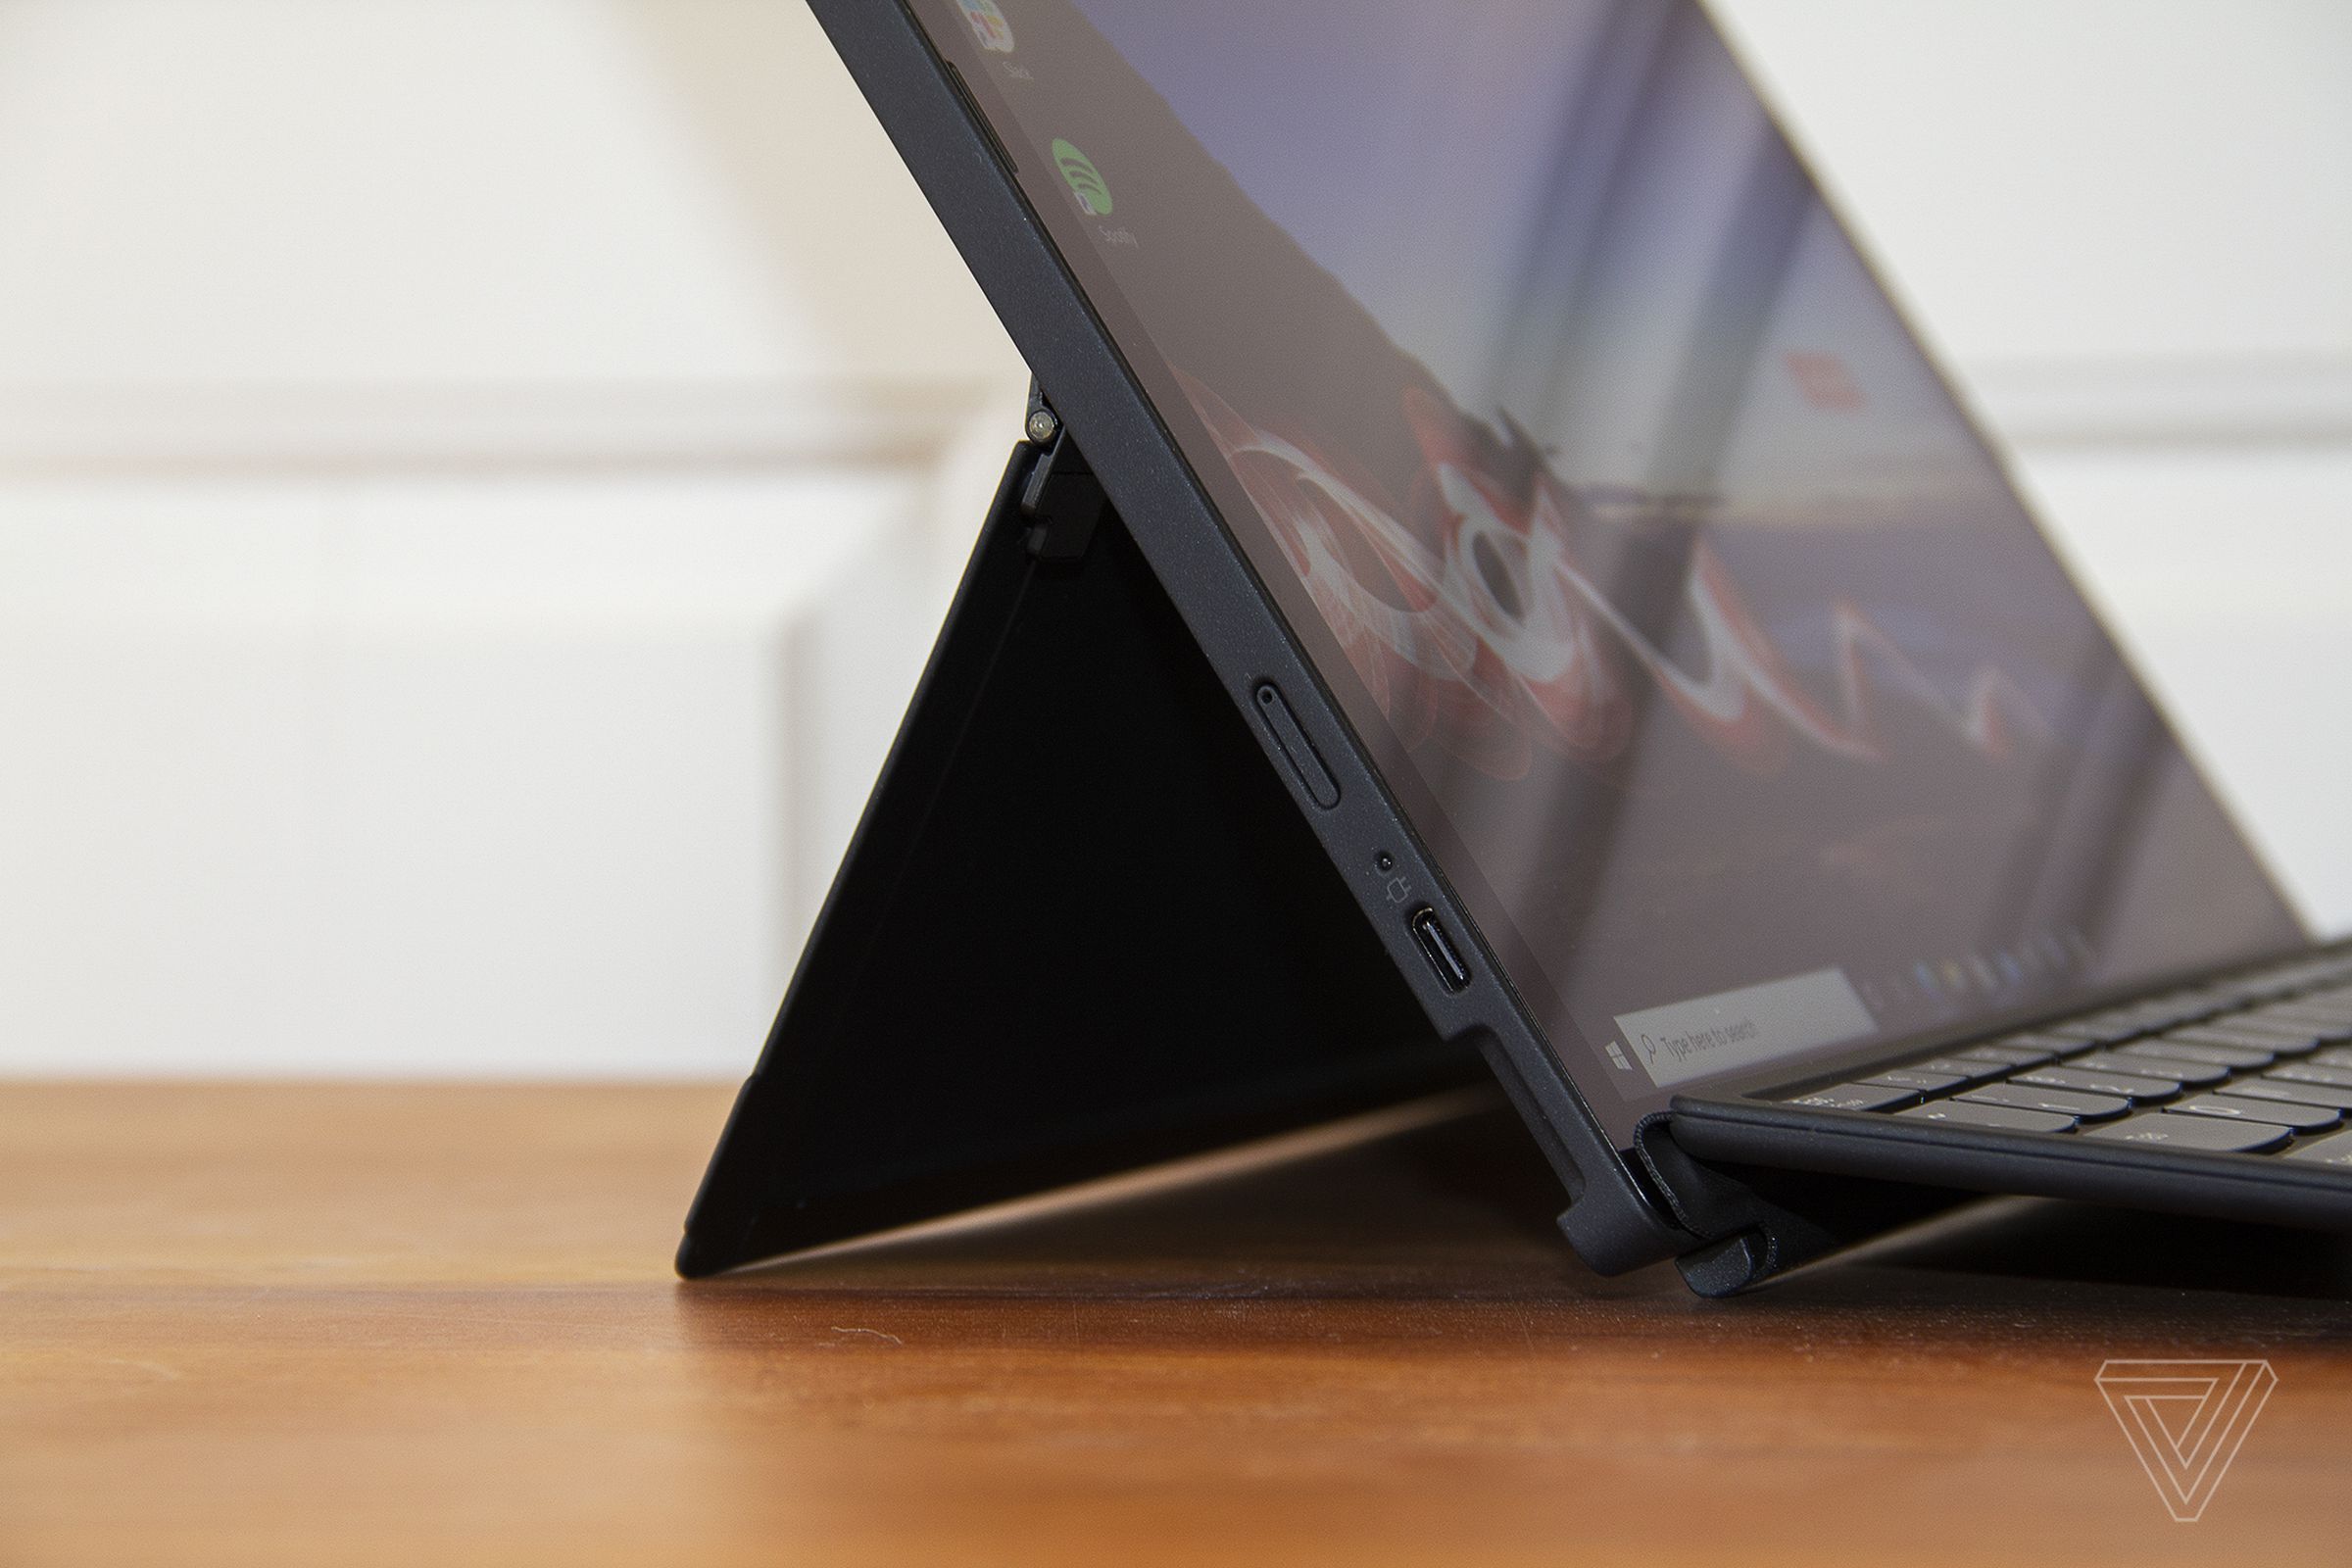 ThinkPad X12 Detachable kickstand from the left up close.